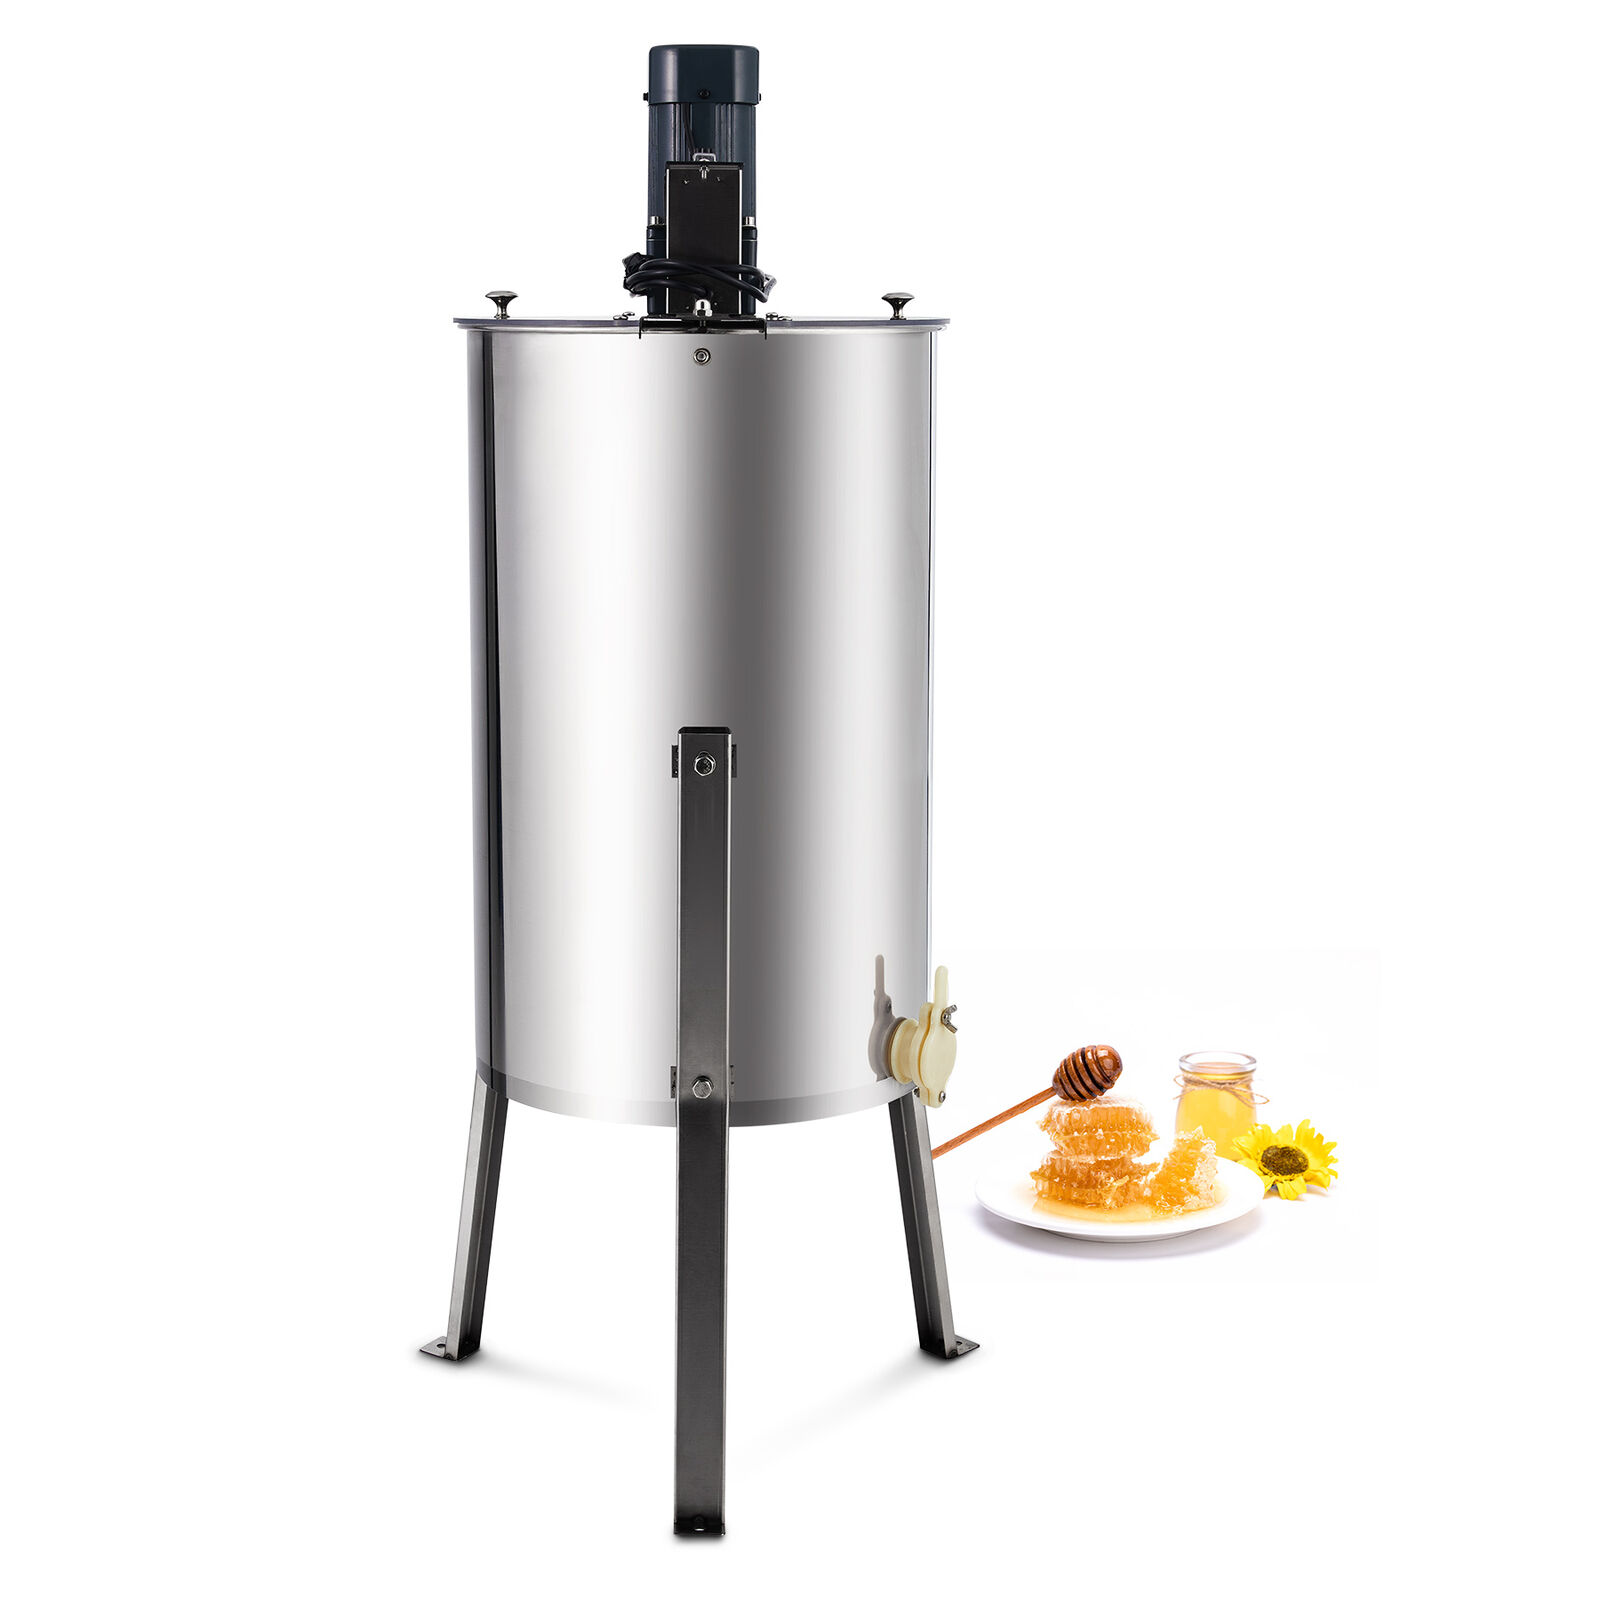 3/6 Frame Electric Honey Extractor Spinner Beekeeping Equipment Stainless Steel